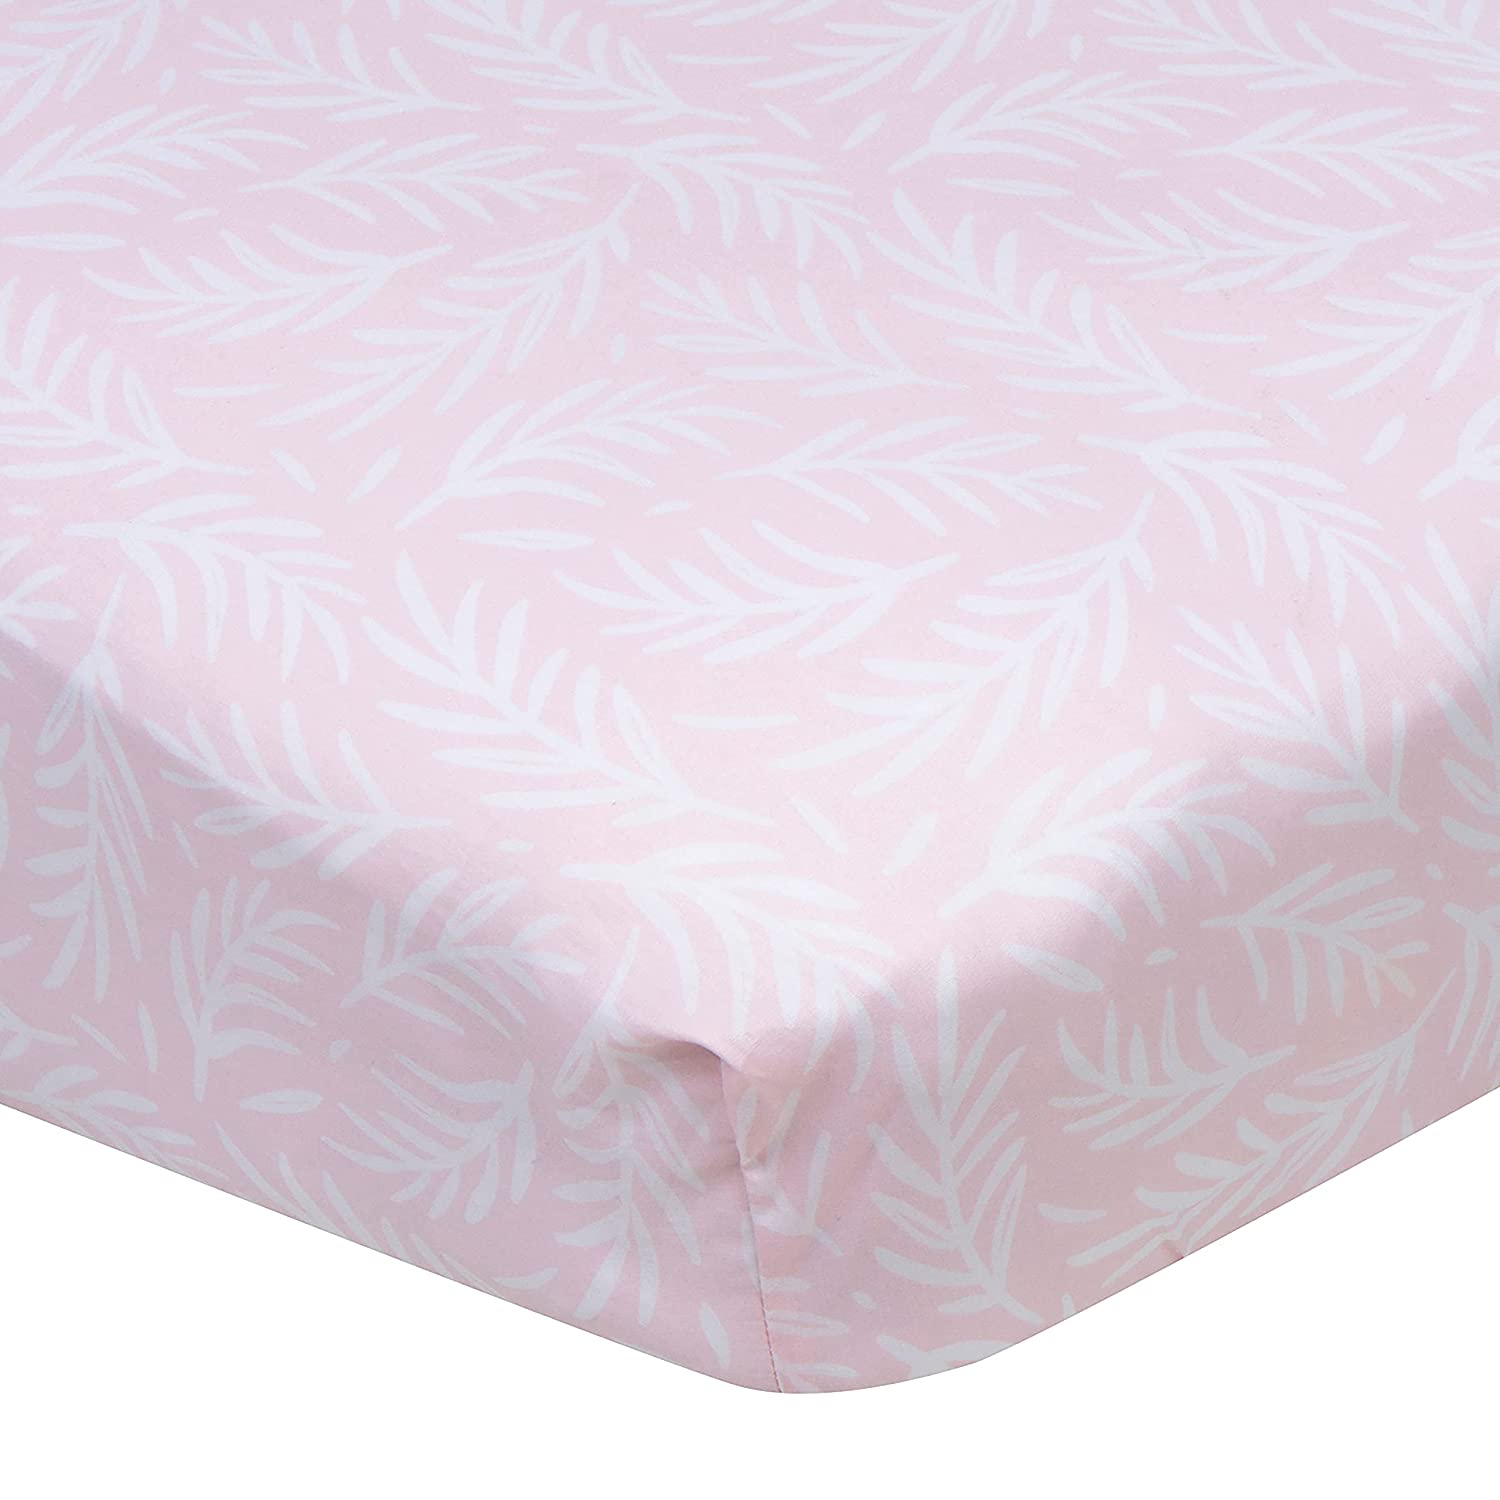 Gerber Baby Boys Girls Neutral Newborn Infant Baby Toddler Nursery 100% Cotton Fitted Bedding Crib Sheet, Leaves Pink, 28″ x 52″